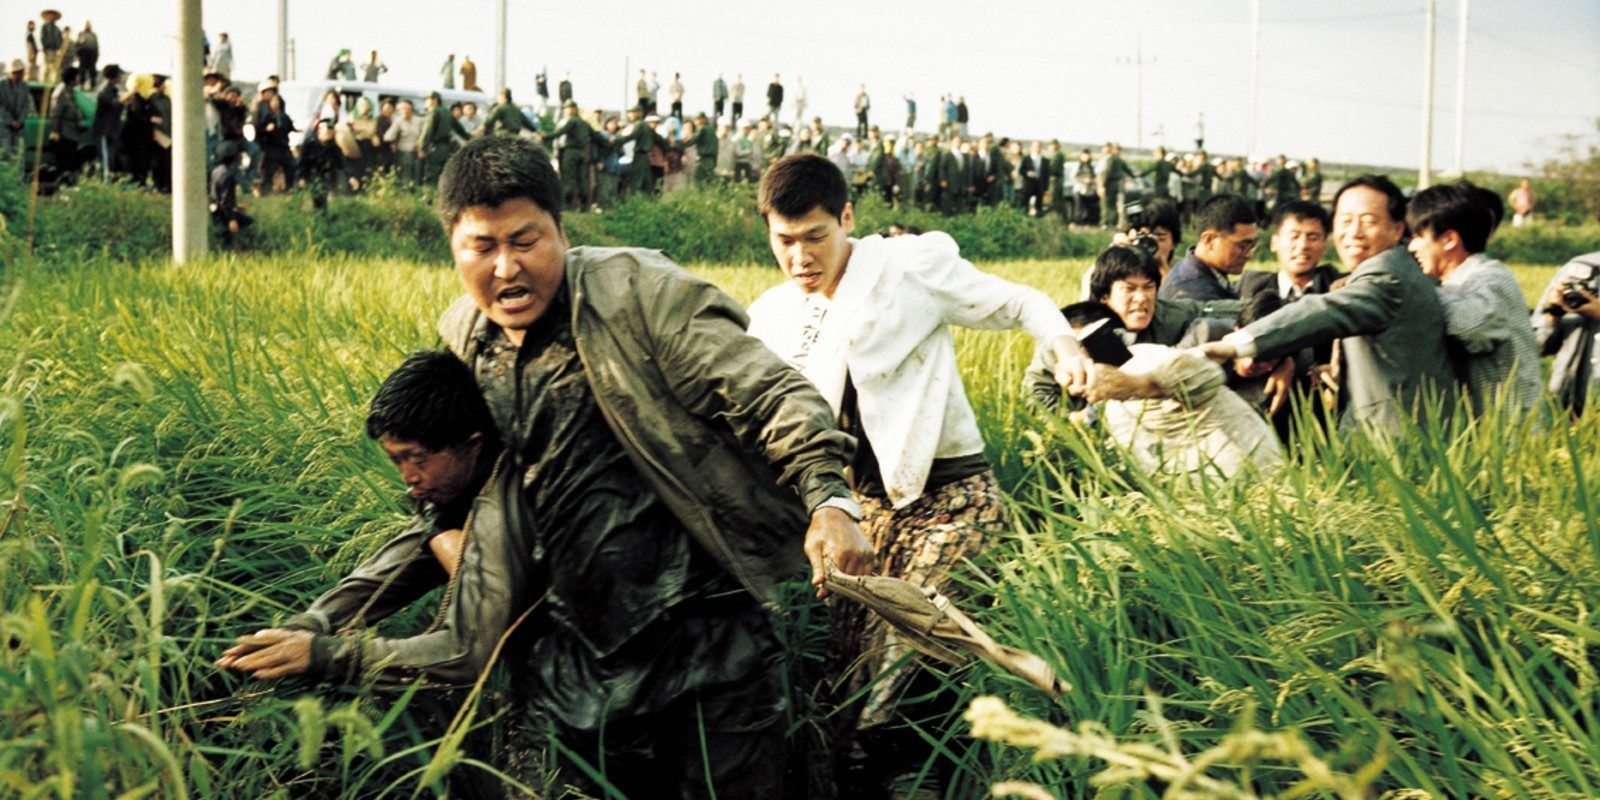 kang song-ho dragging suspect through a field in Memories of Murder